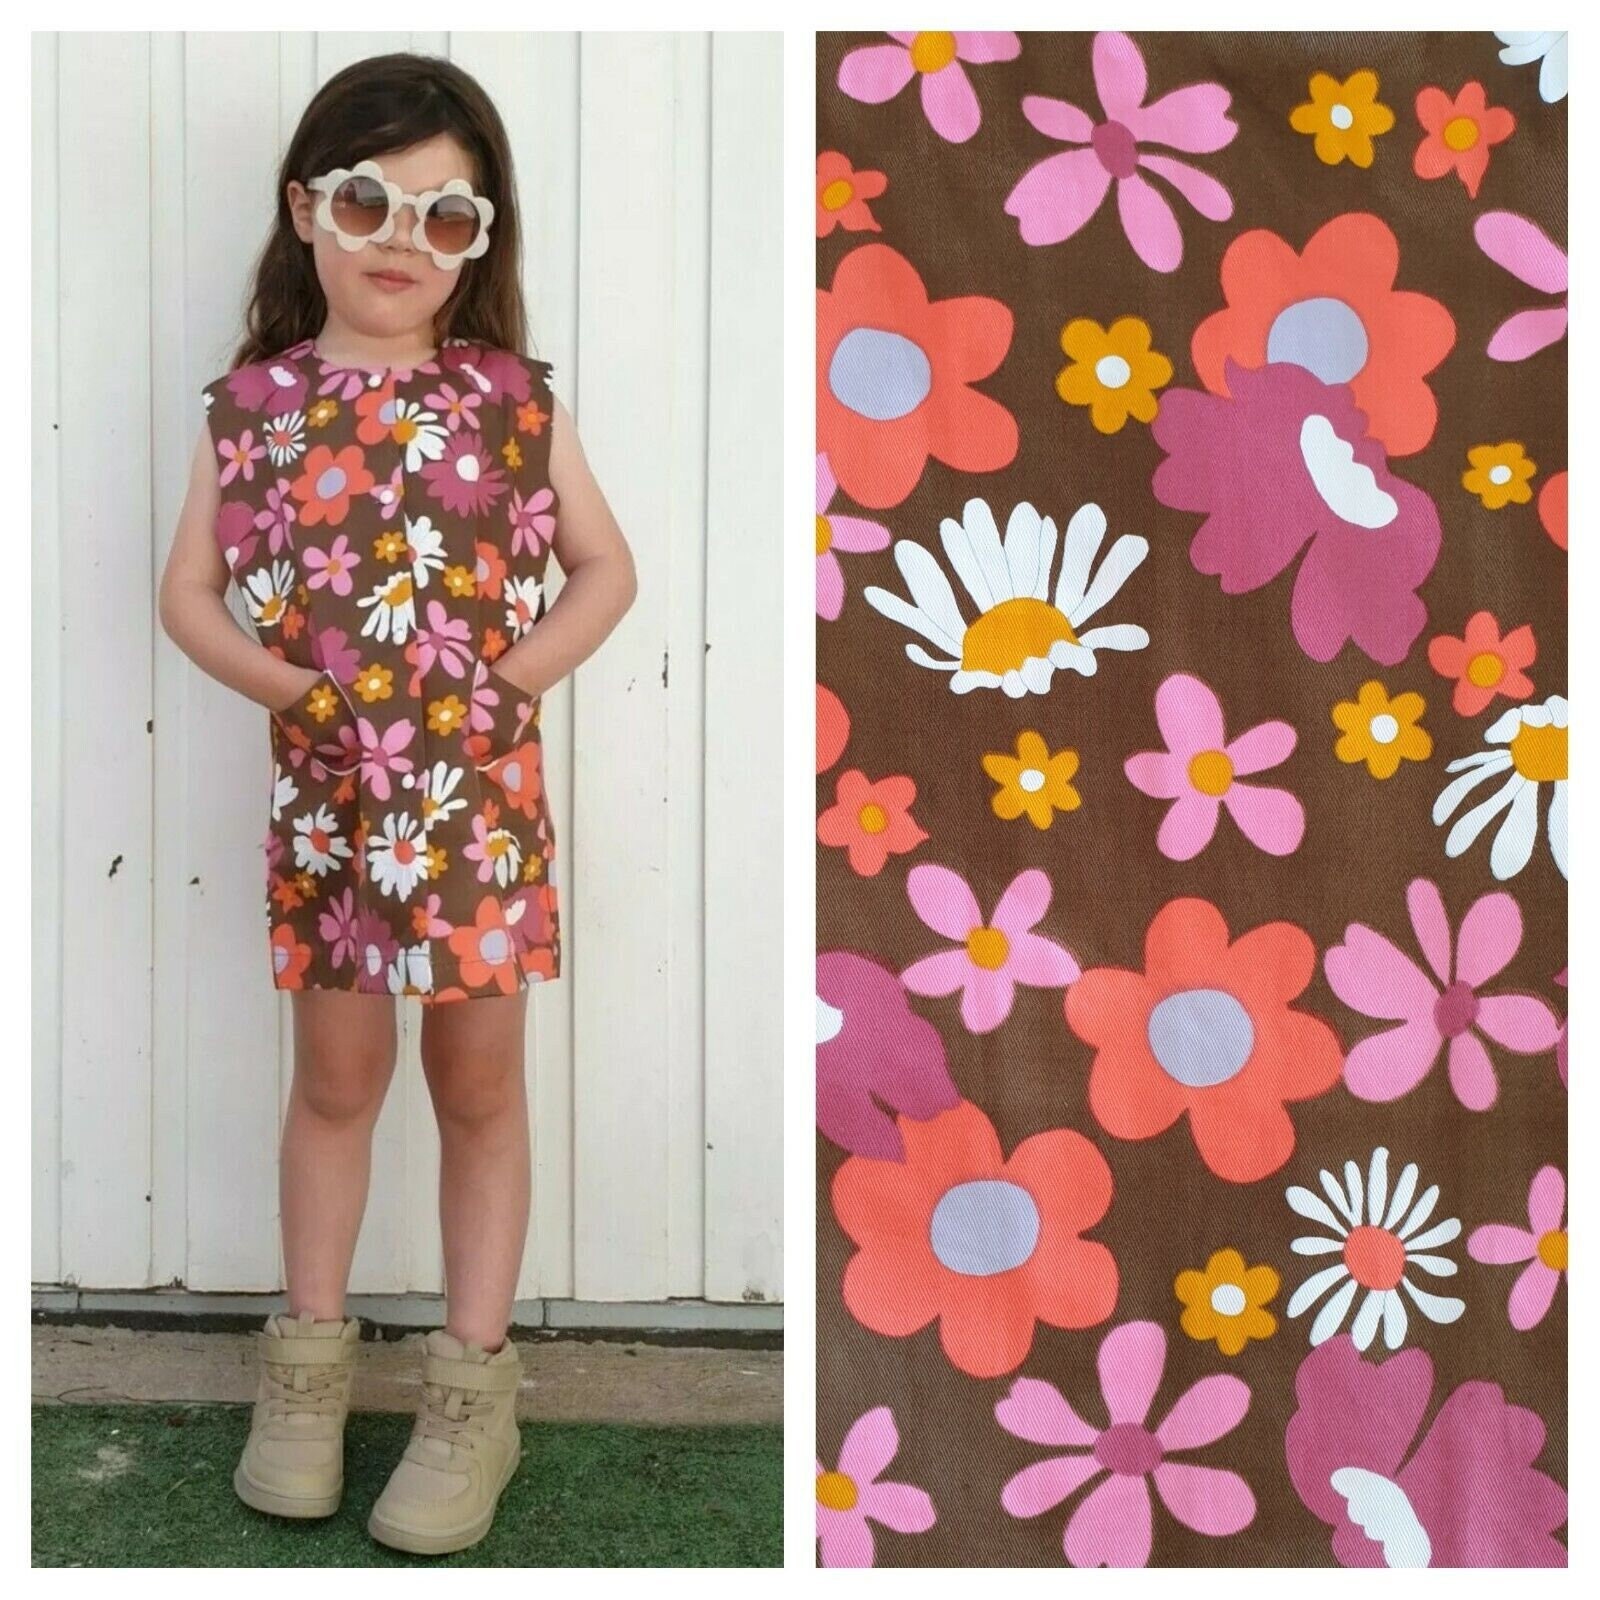 Vintage Aprons, Retro Aprons, Old Fashioned Aprons & Patterns Vintage Kitsch Retro 1960S Cuckoo Deadstock Bold Flower Power Floral Print Mod Cotton Hippie Pink Apron Tunic Mini Dress Approx 5-6 Years $40.81 AT vintagedancer.com